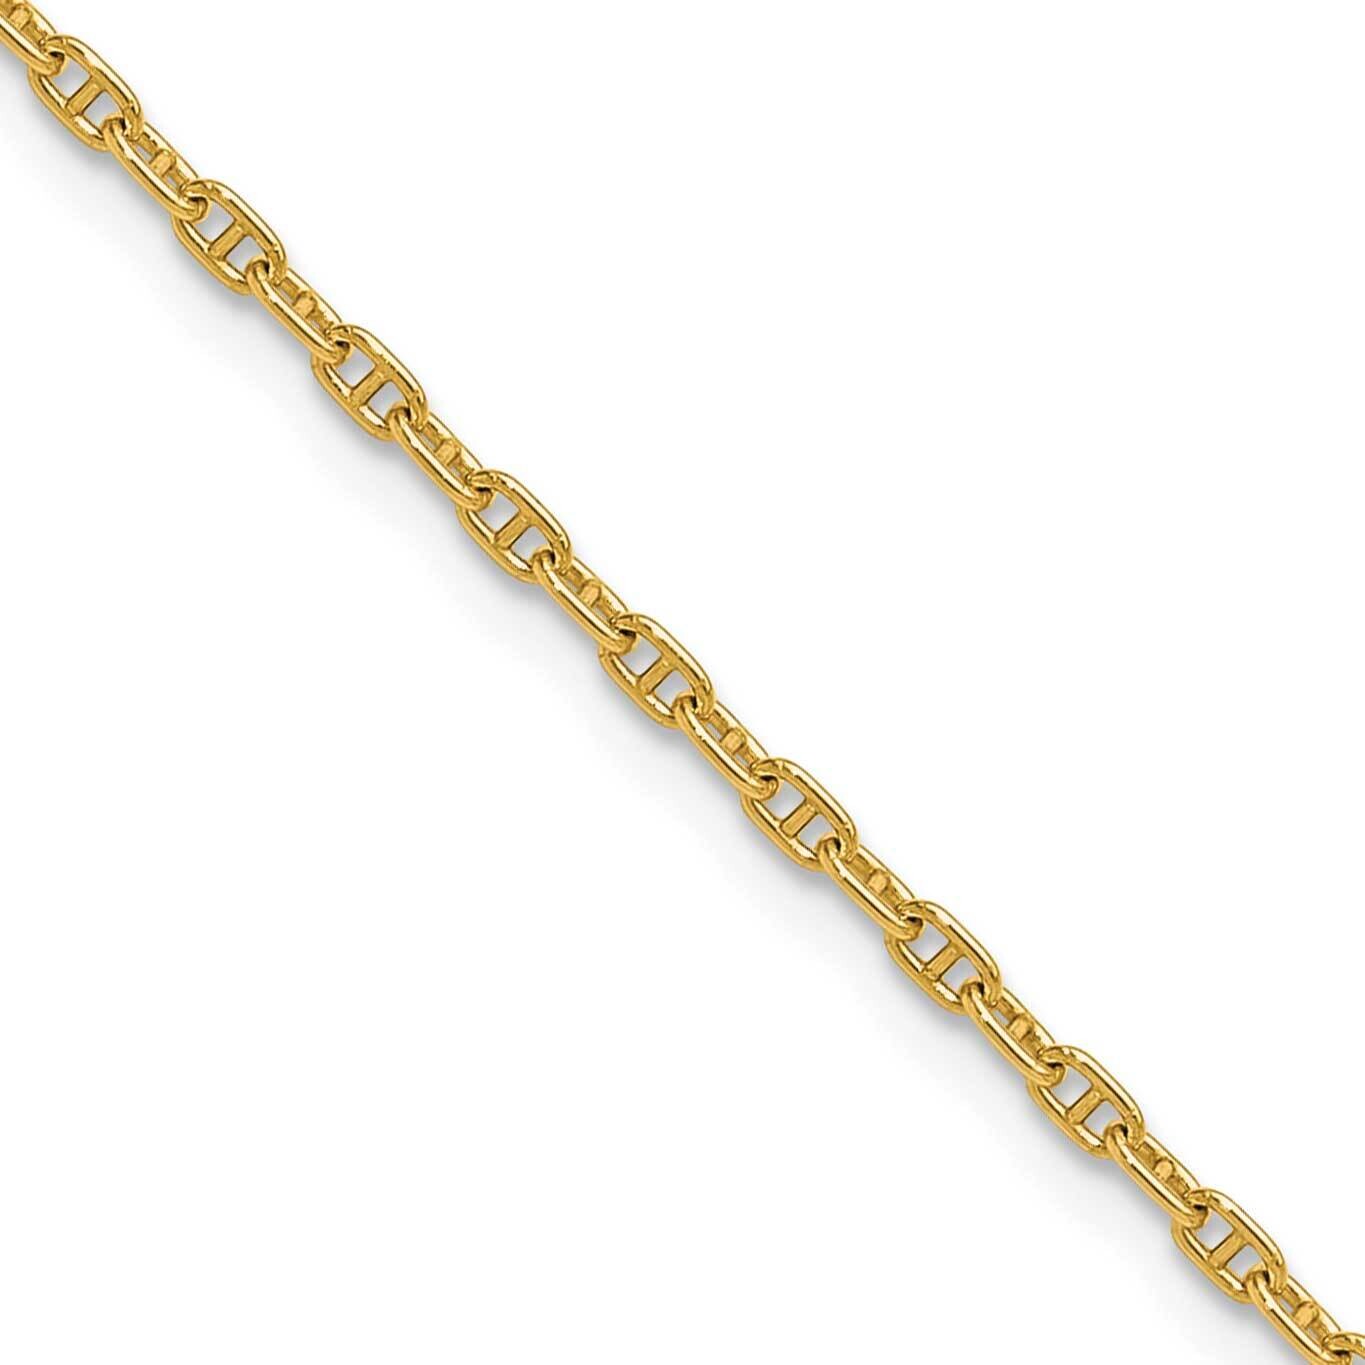 1.8mm Mariners Link Chain 24 Inch 14k Gold MA050-24